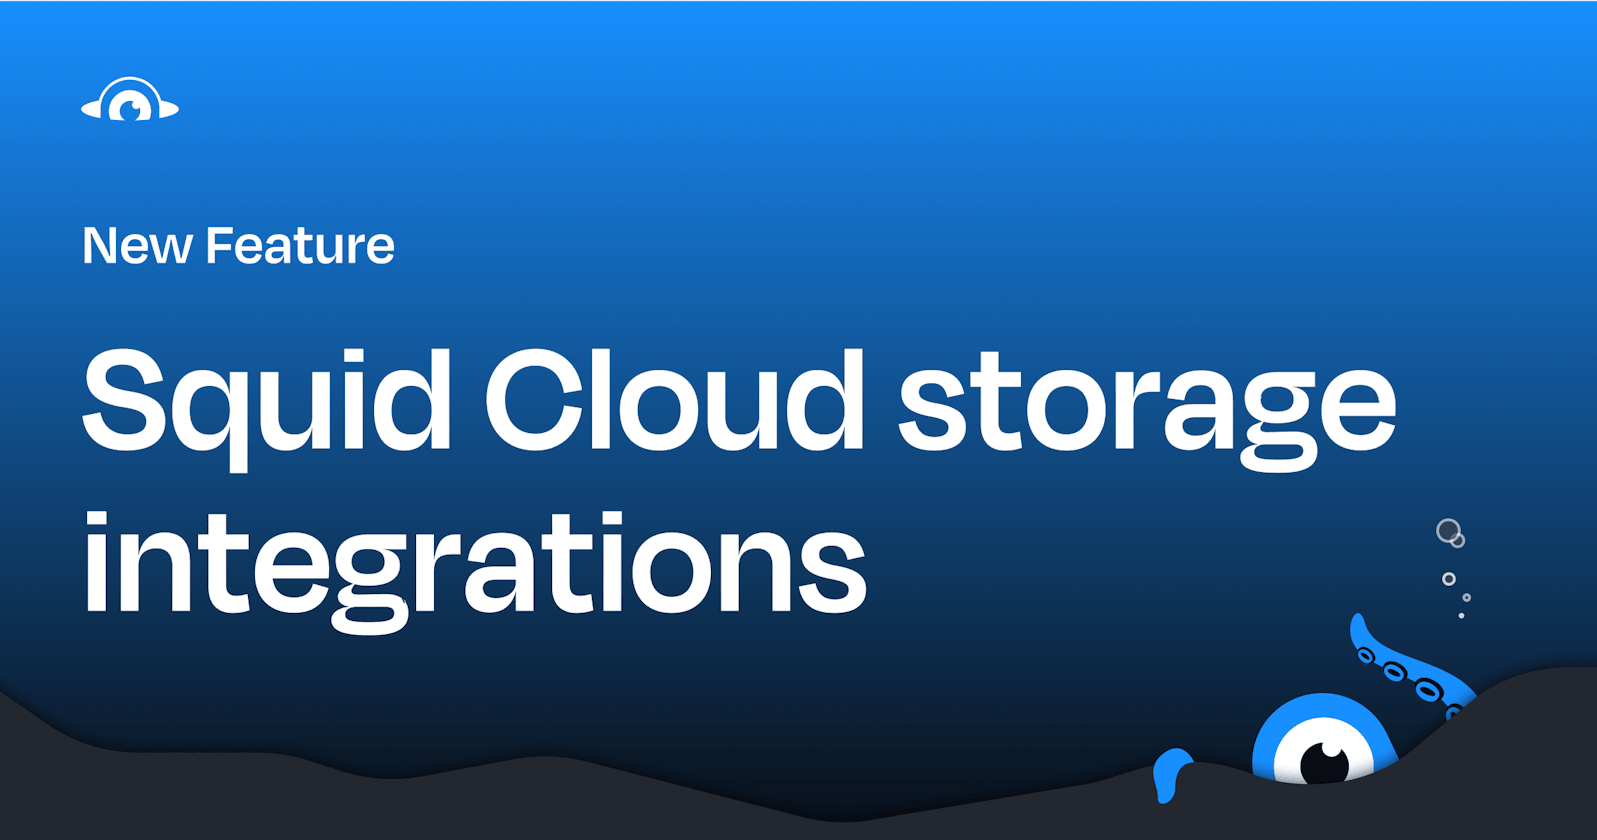 New Feature: Squid Cloud storage integrations